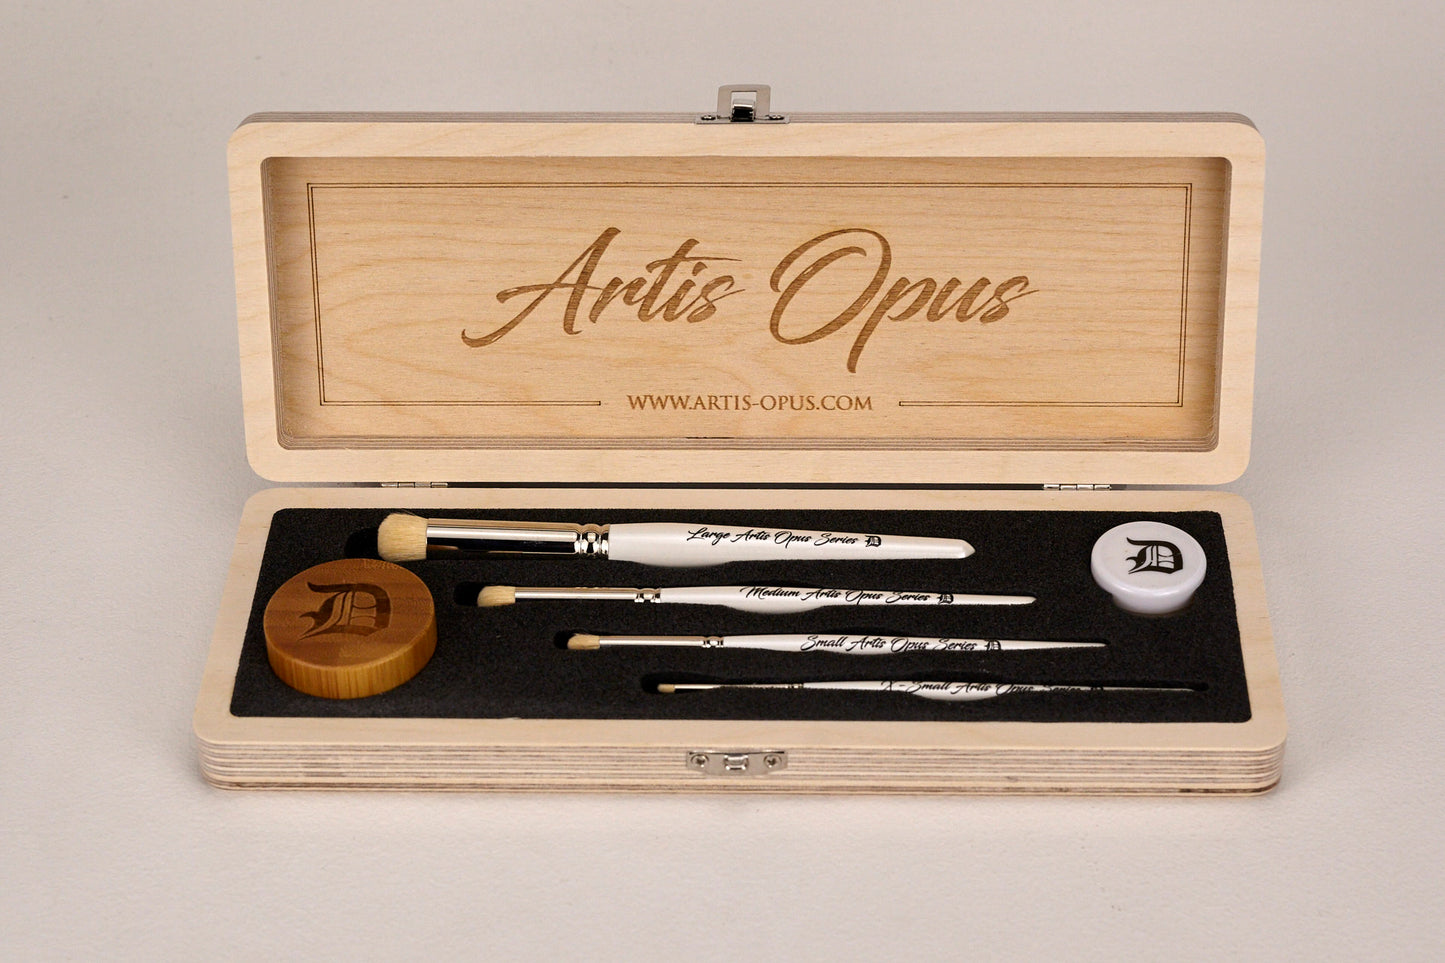 Artis Opus - Series D production is well underway! If you missed